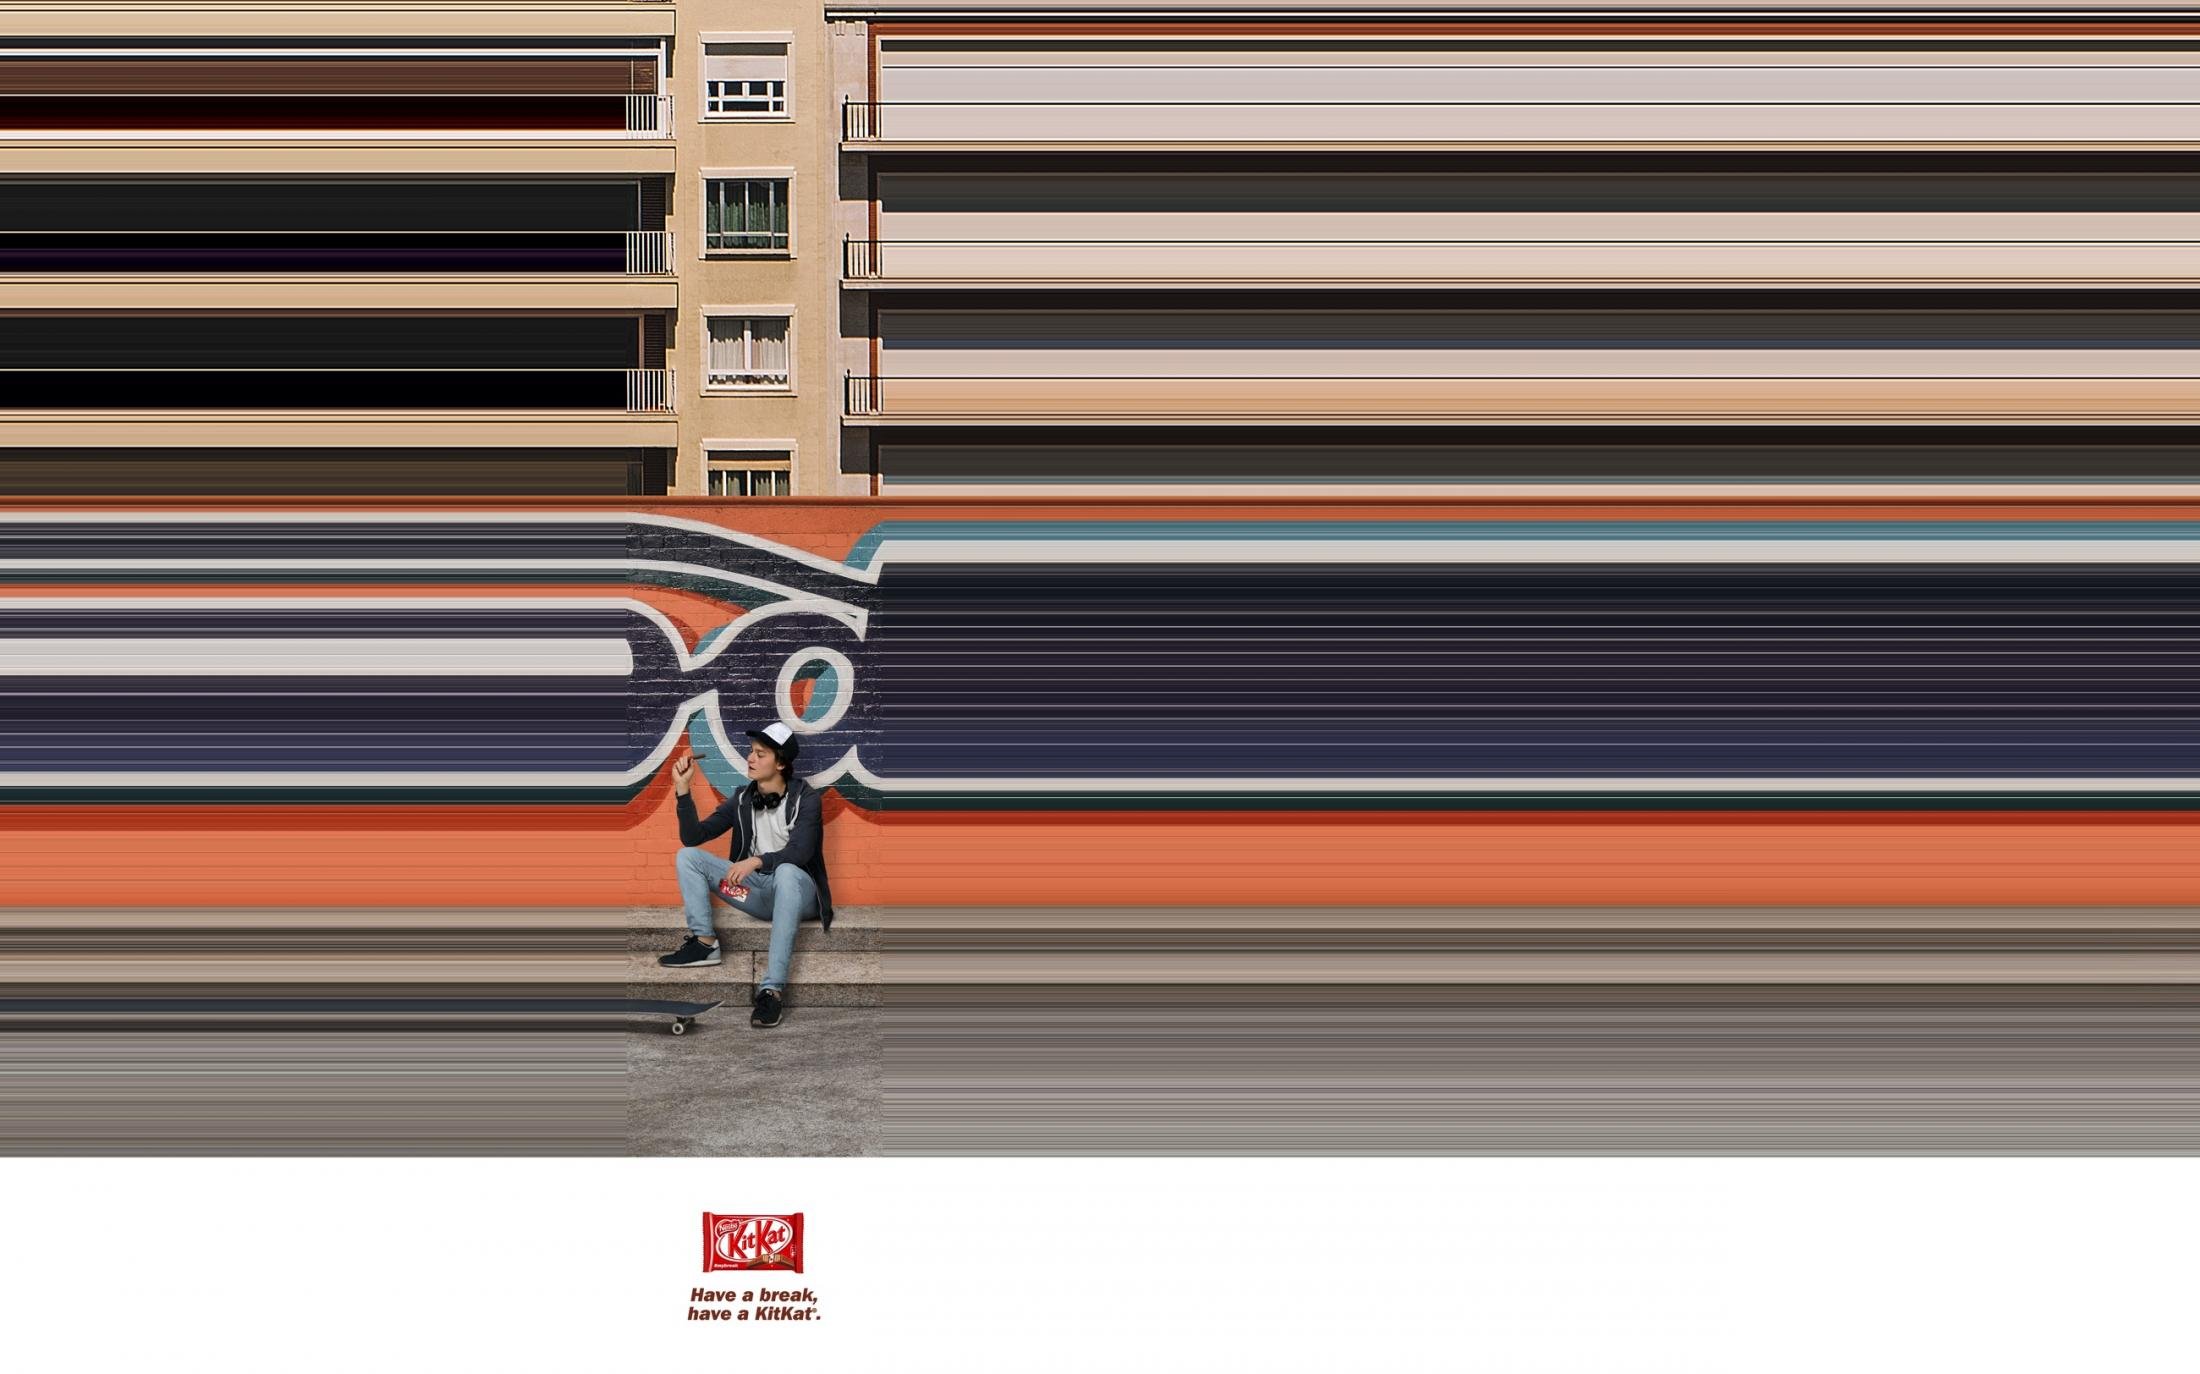 Break the Speed, the Kit Kat campaign that invites us to take a break